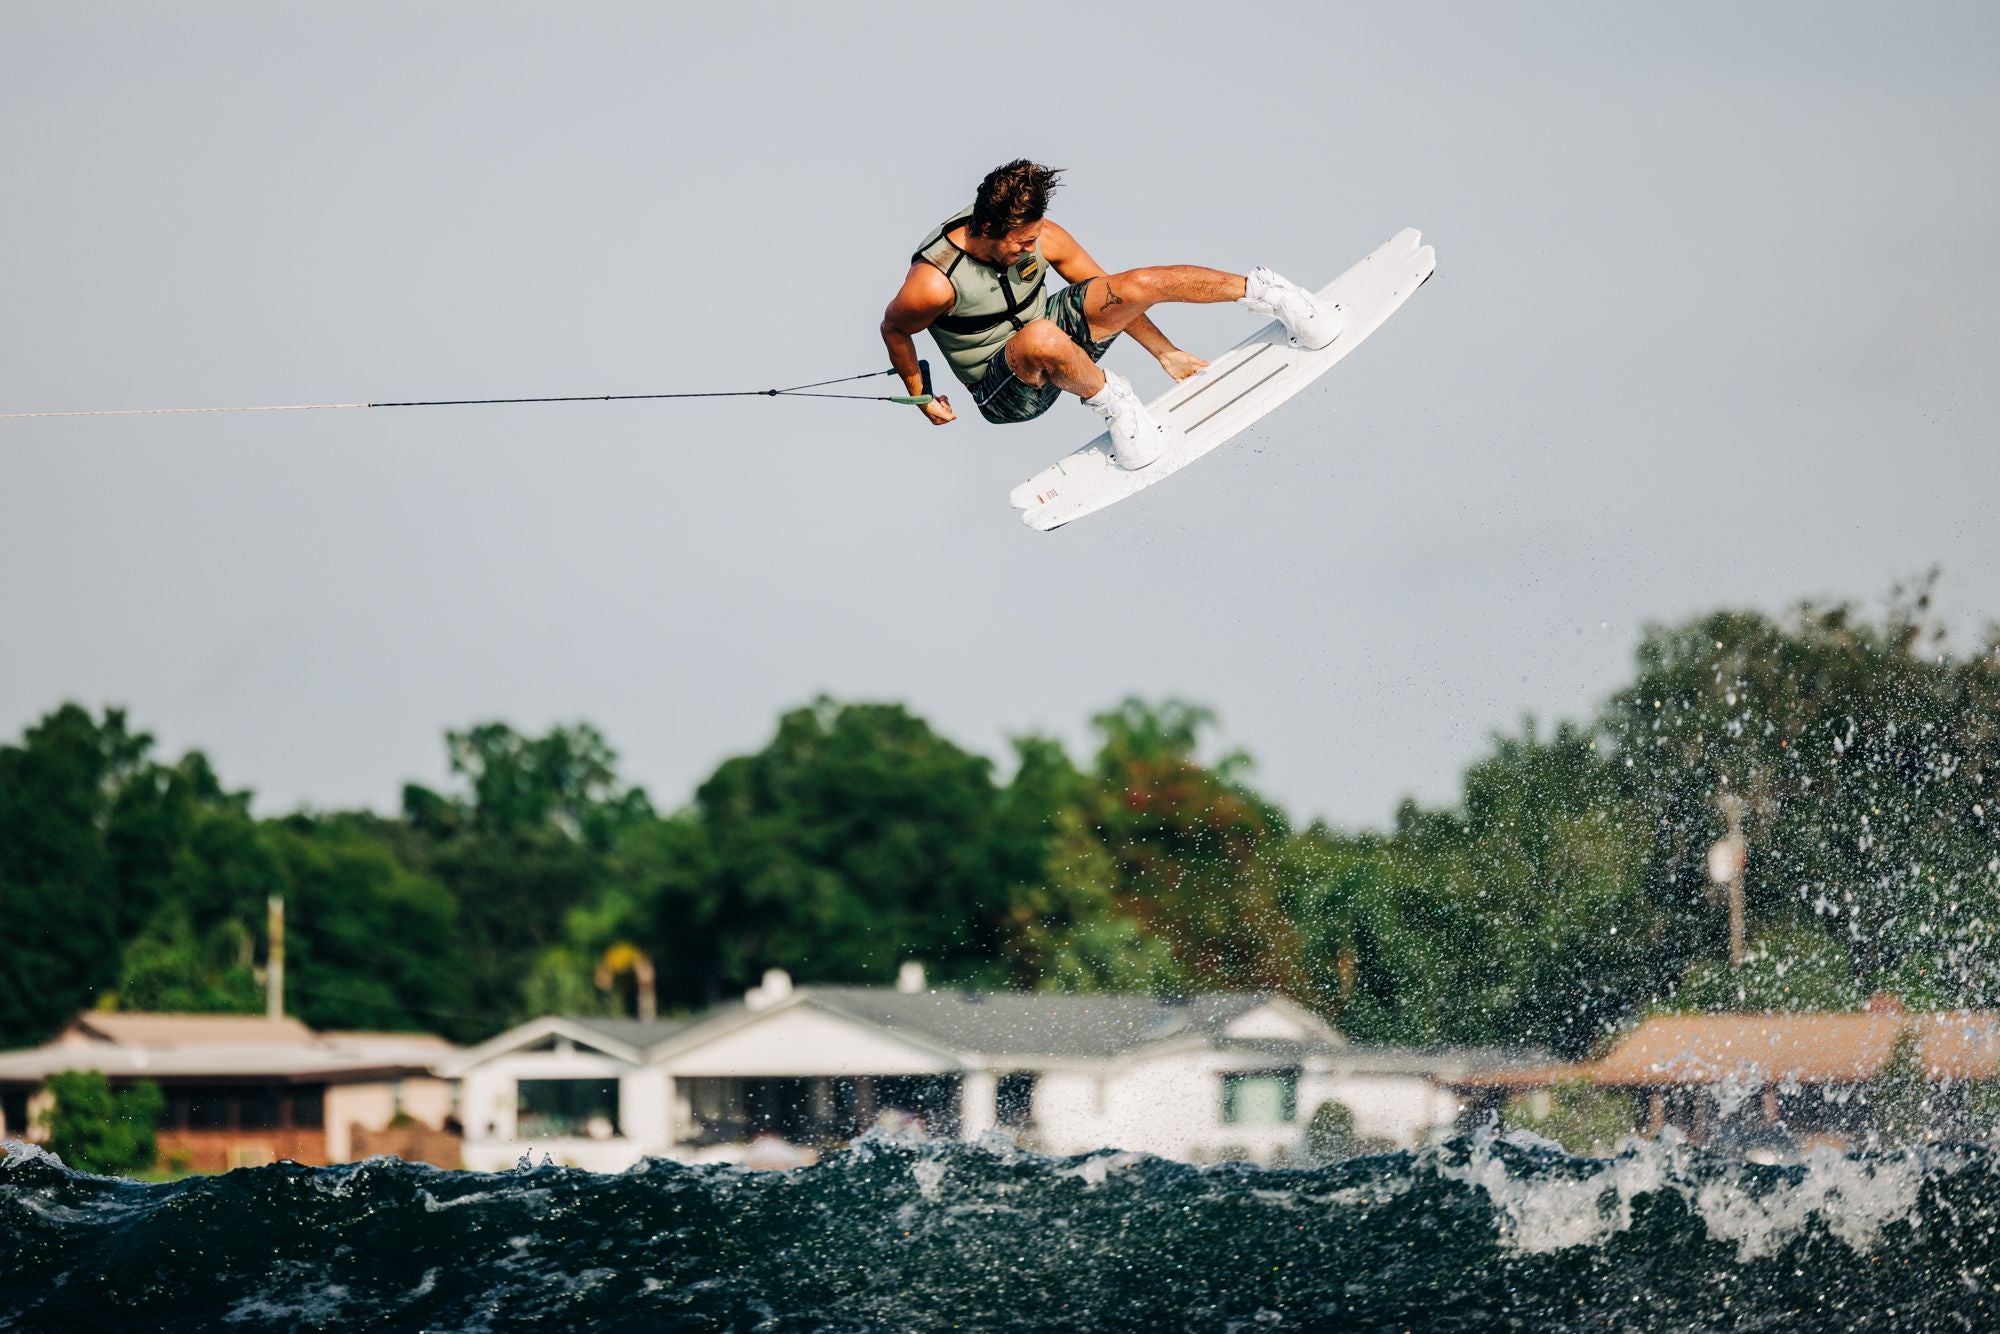 A woman wakeboarding in the air over a lake, showcasing her Liquid Force 2024 Aero 6X Boots - White bindings and flexible yet ultra-supportive experience.